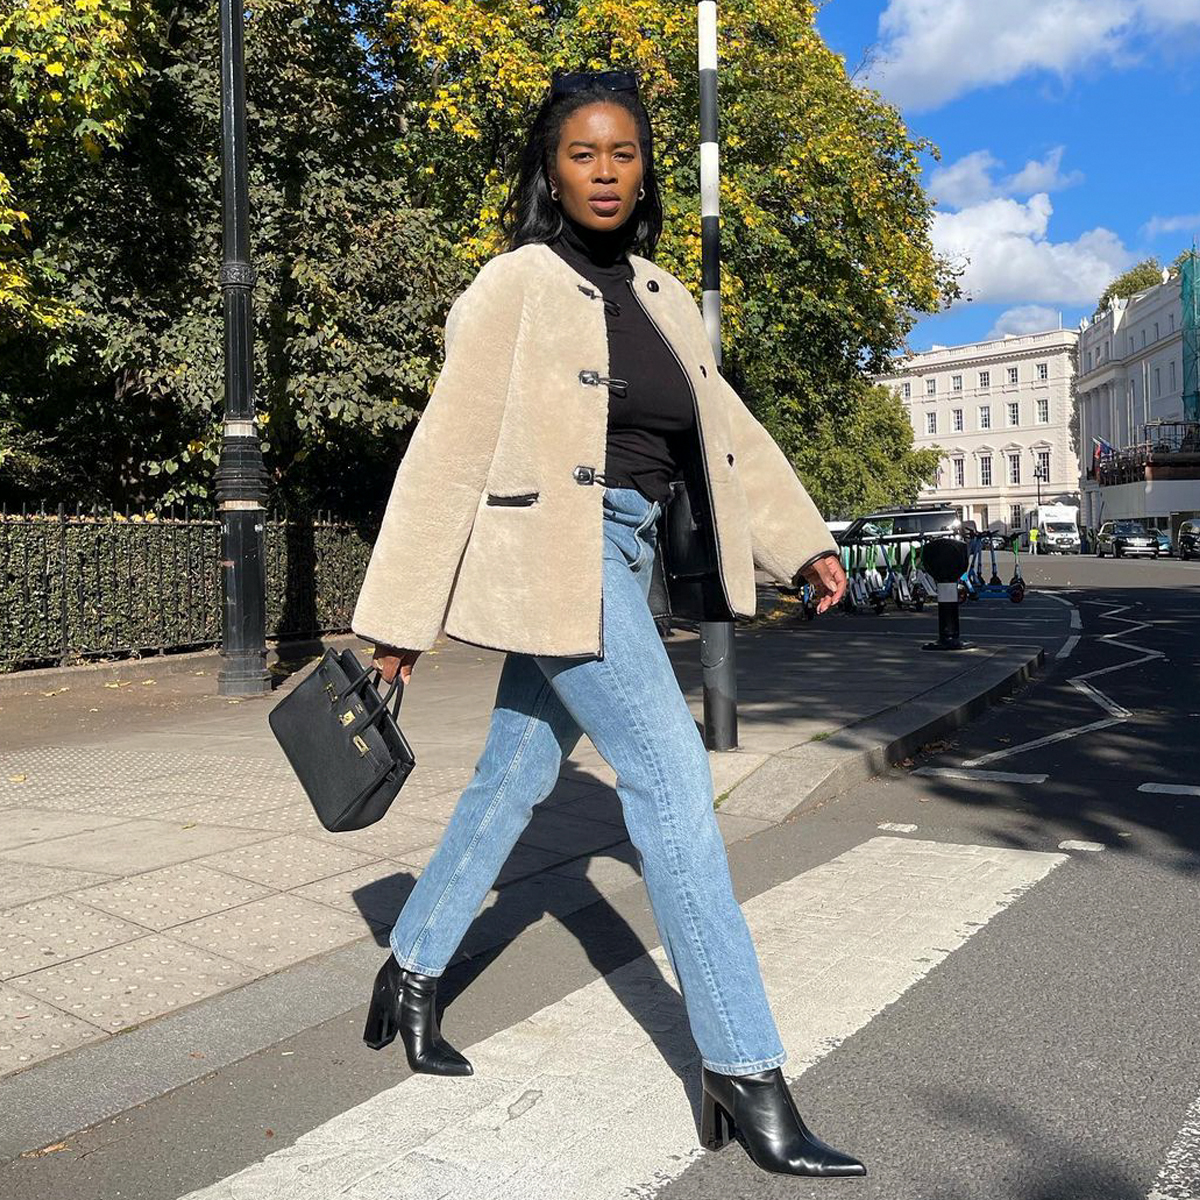 Ie Swamp soft 10 Jeans, Coats and Boots Outfit Ideas to Try This Winter | Who What Wear UK